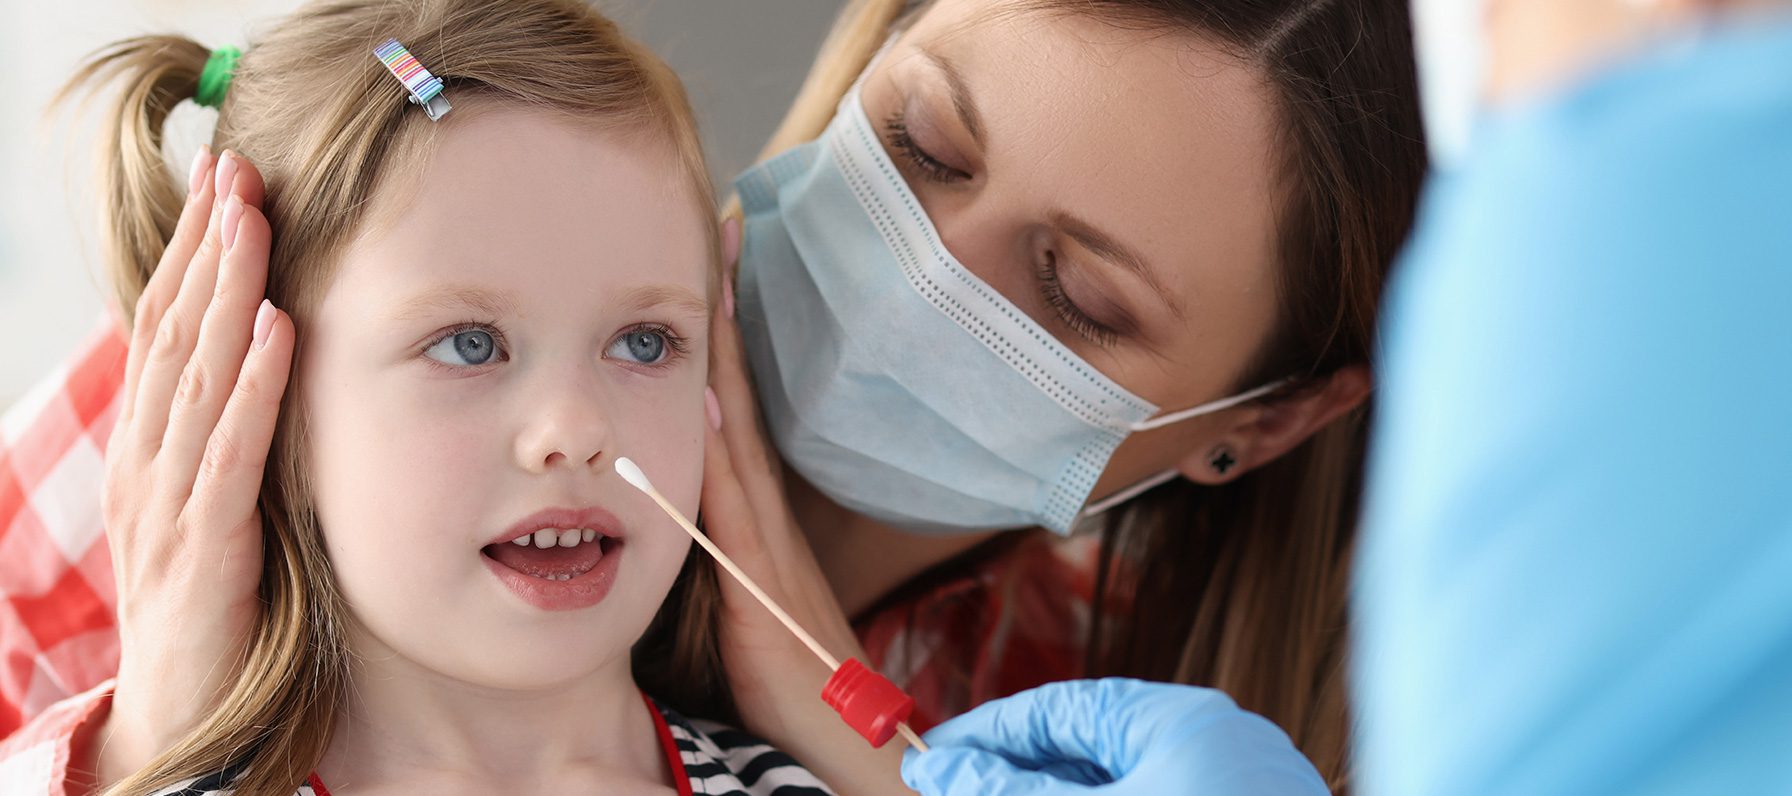 Child Tested for COVID-19 with Swab Nasal Swab